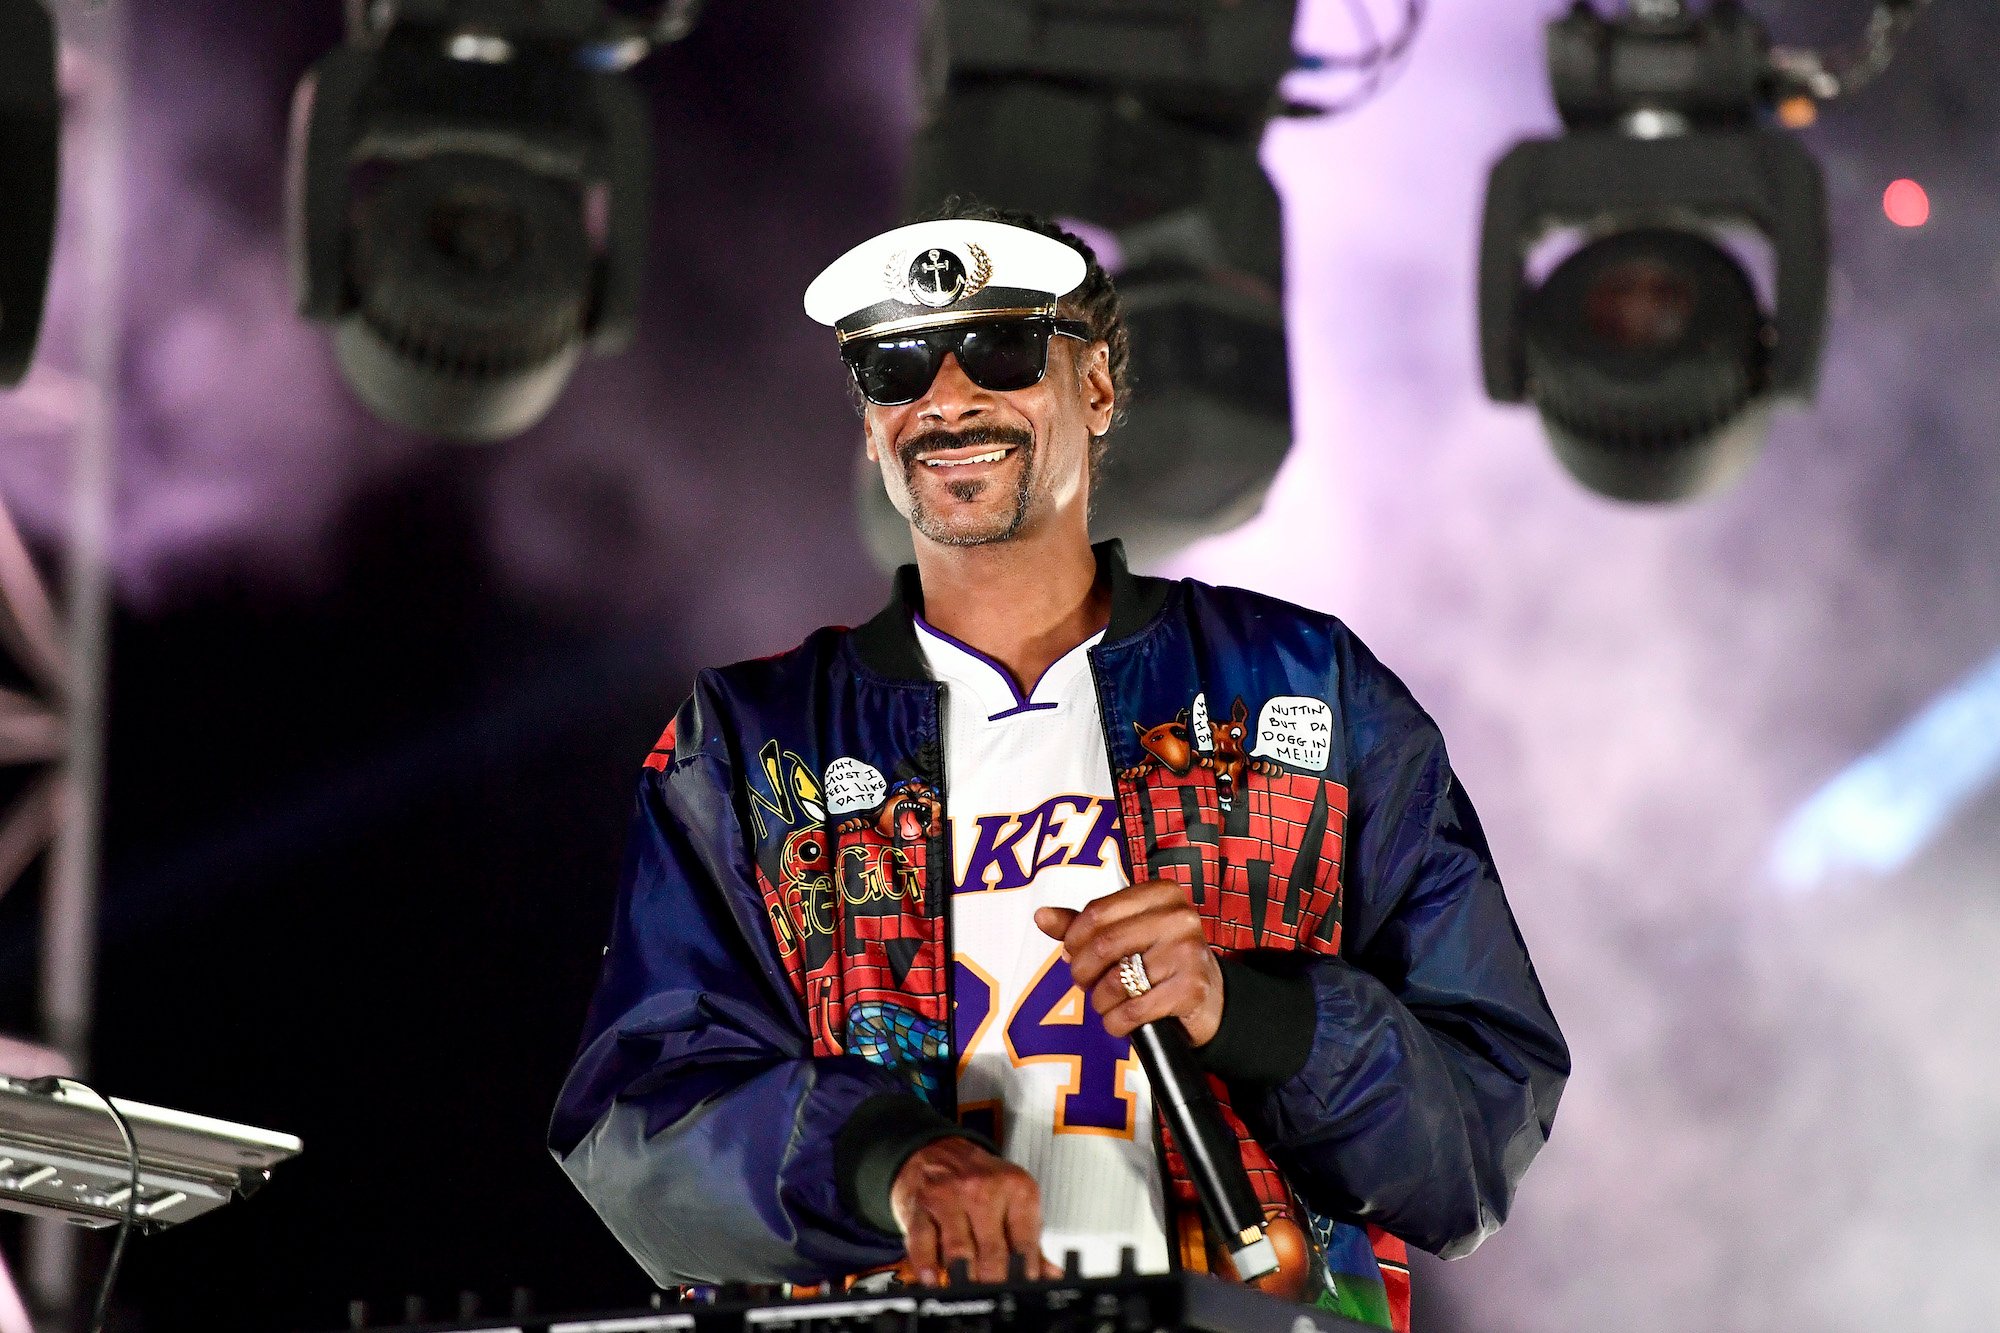 Snoop Dogg smiling at a soundboard, on stage